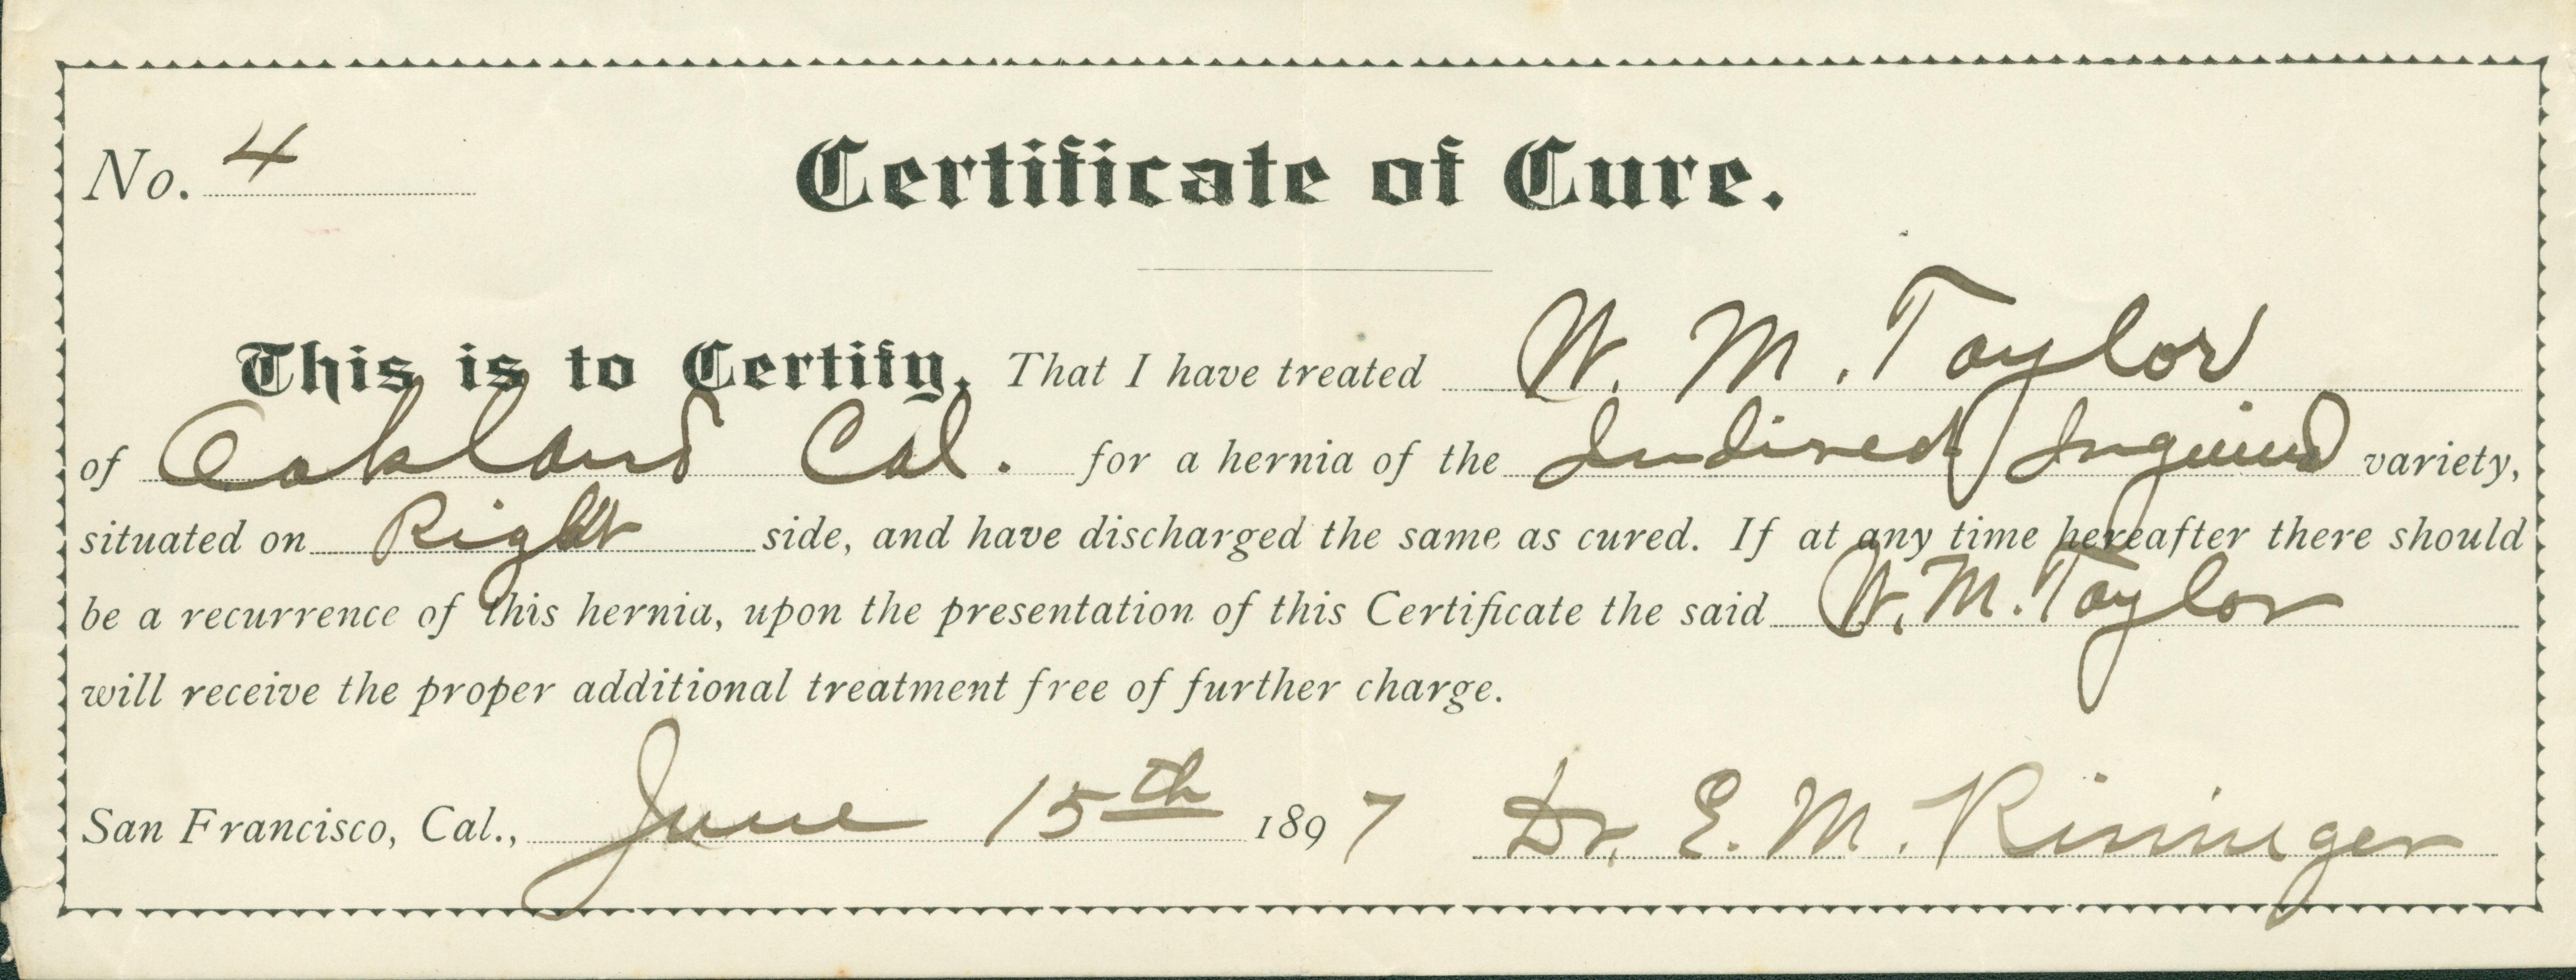 A certificate certifying that W.M. Taylor was cured of a hernia